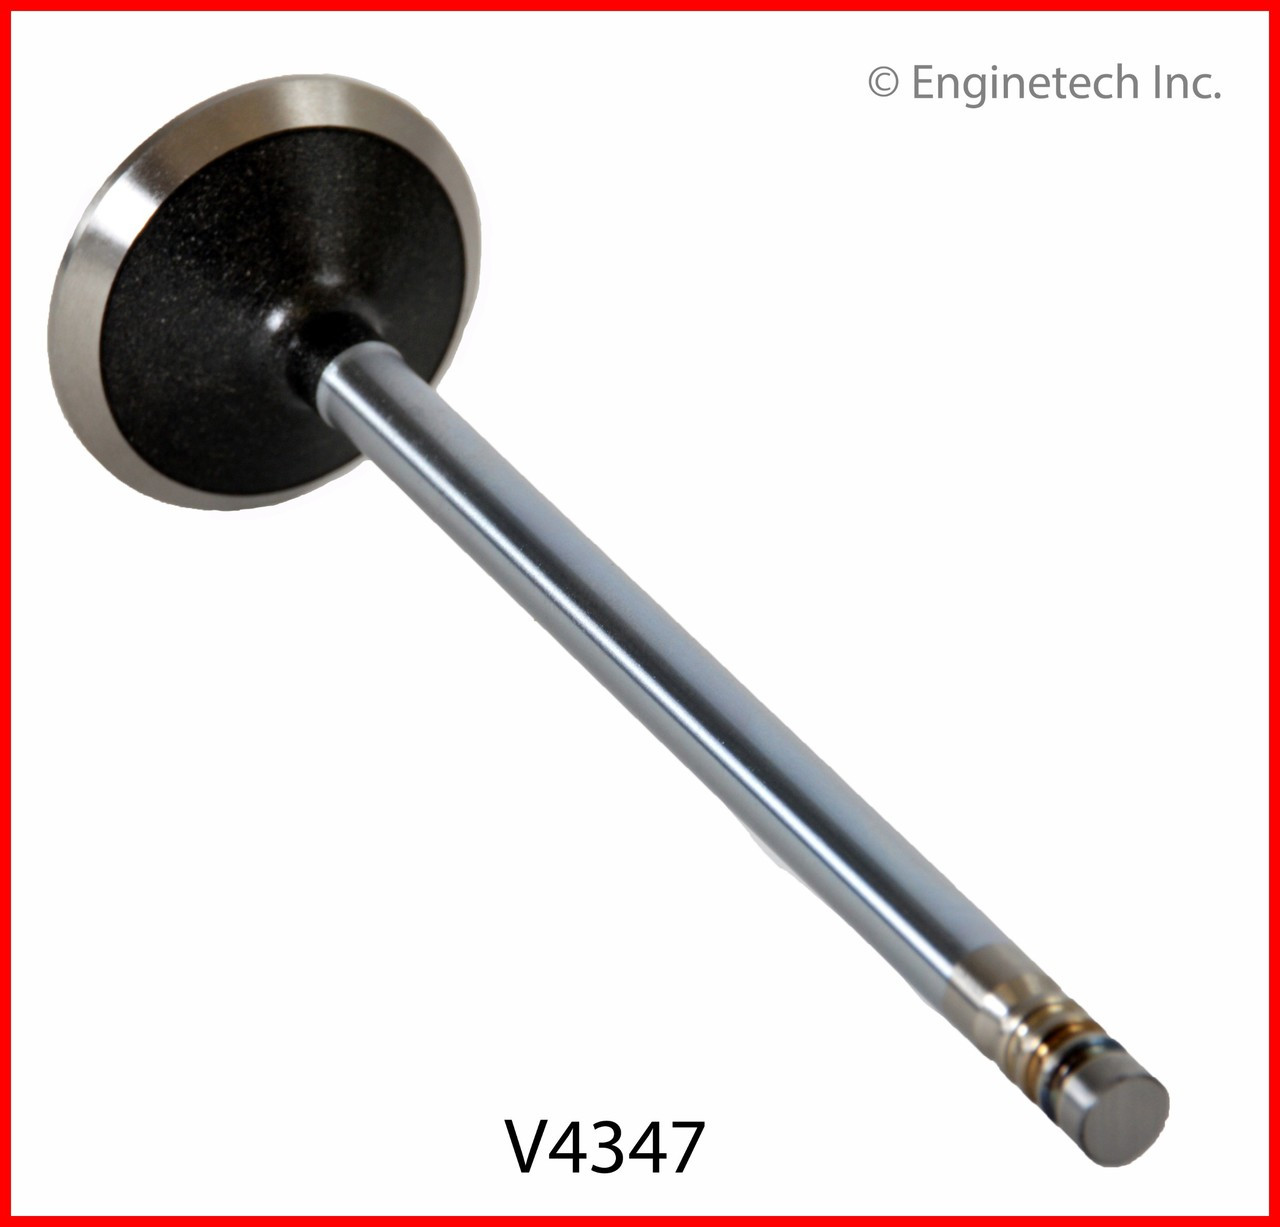 Exhaust Valve - 2001 Chrysler Town & Country 3.8L (V4347.A4)